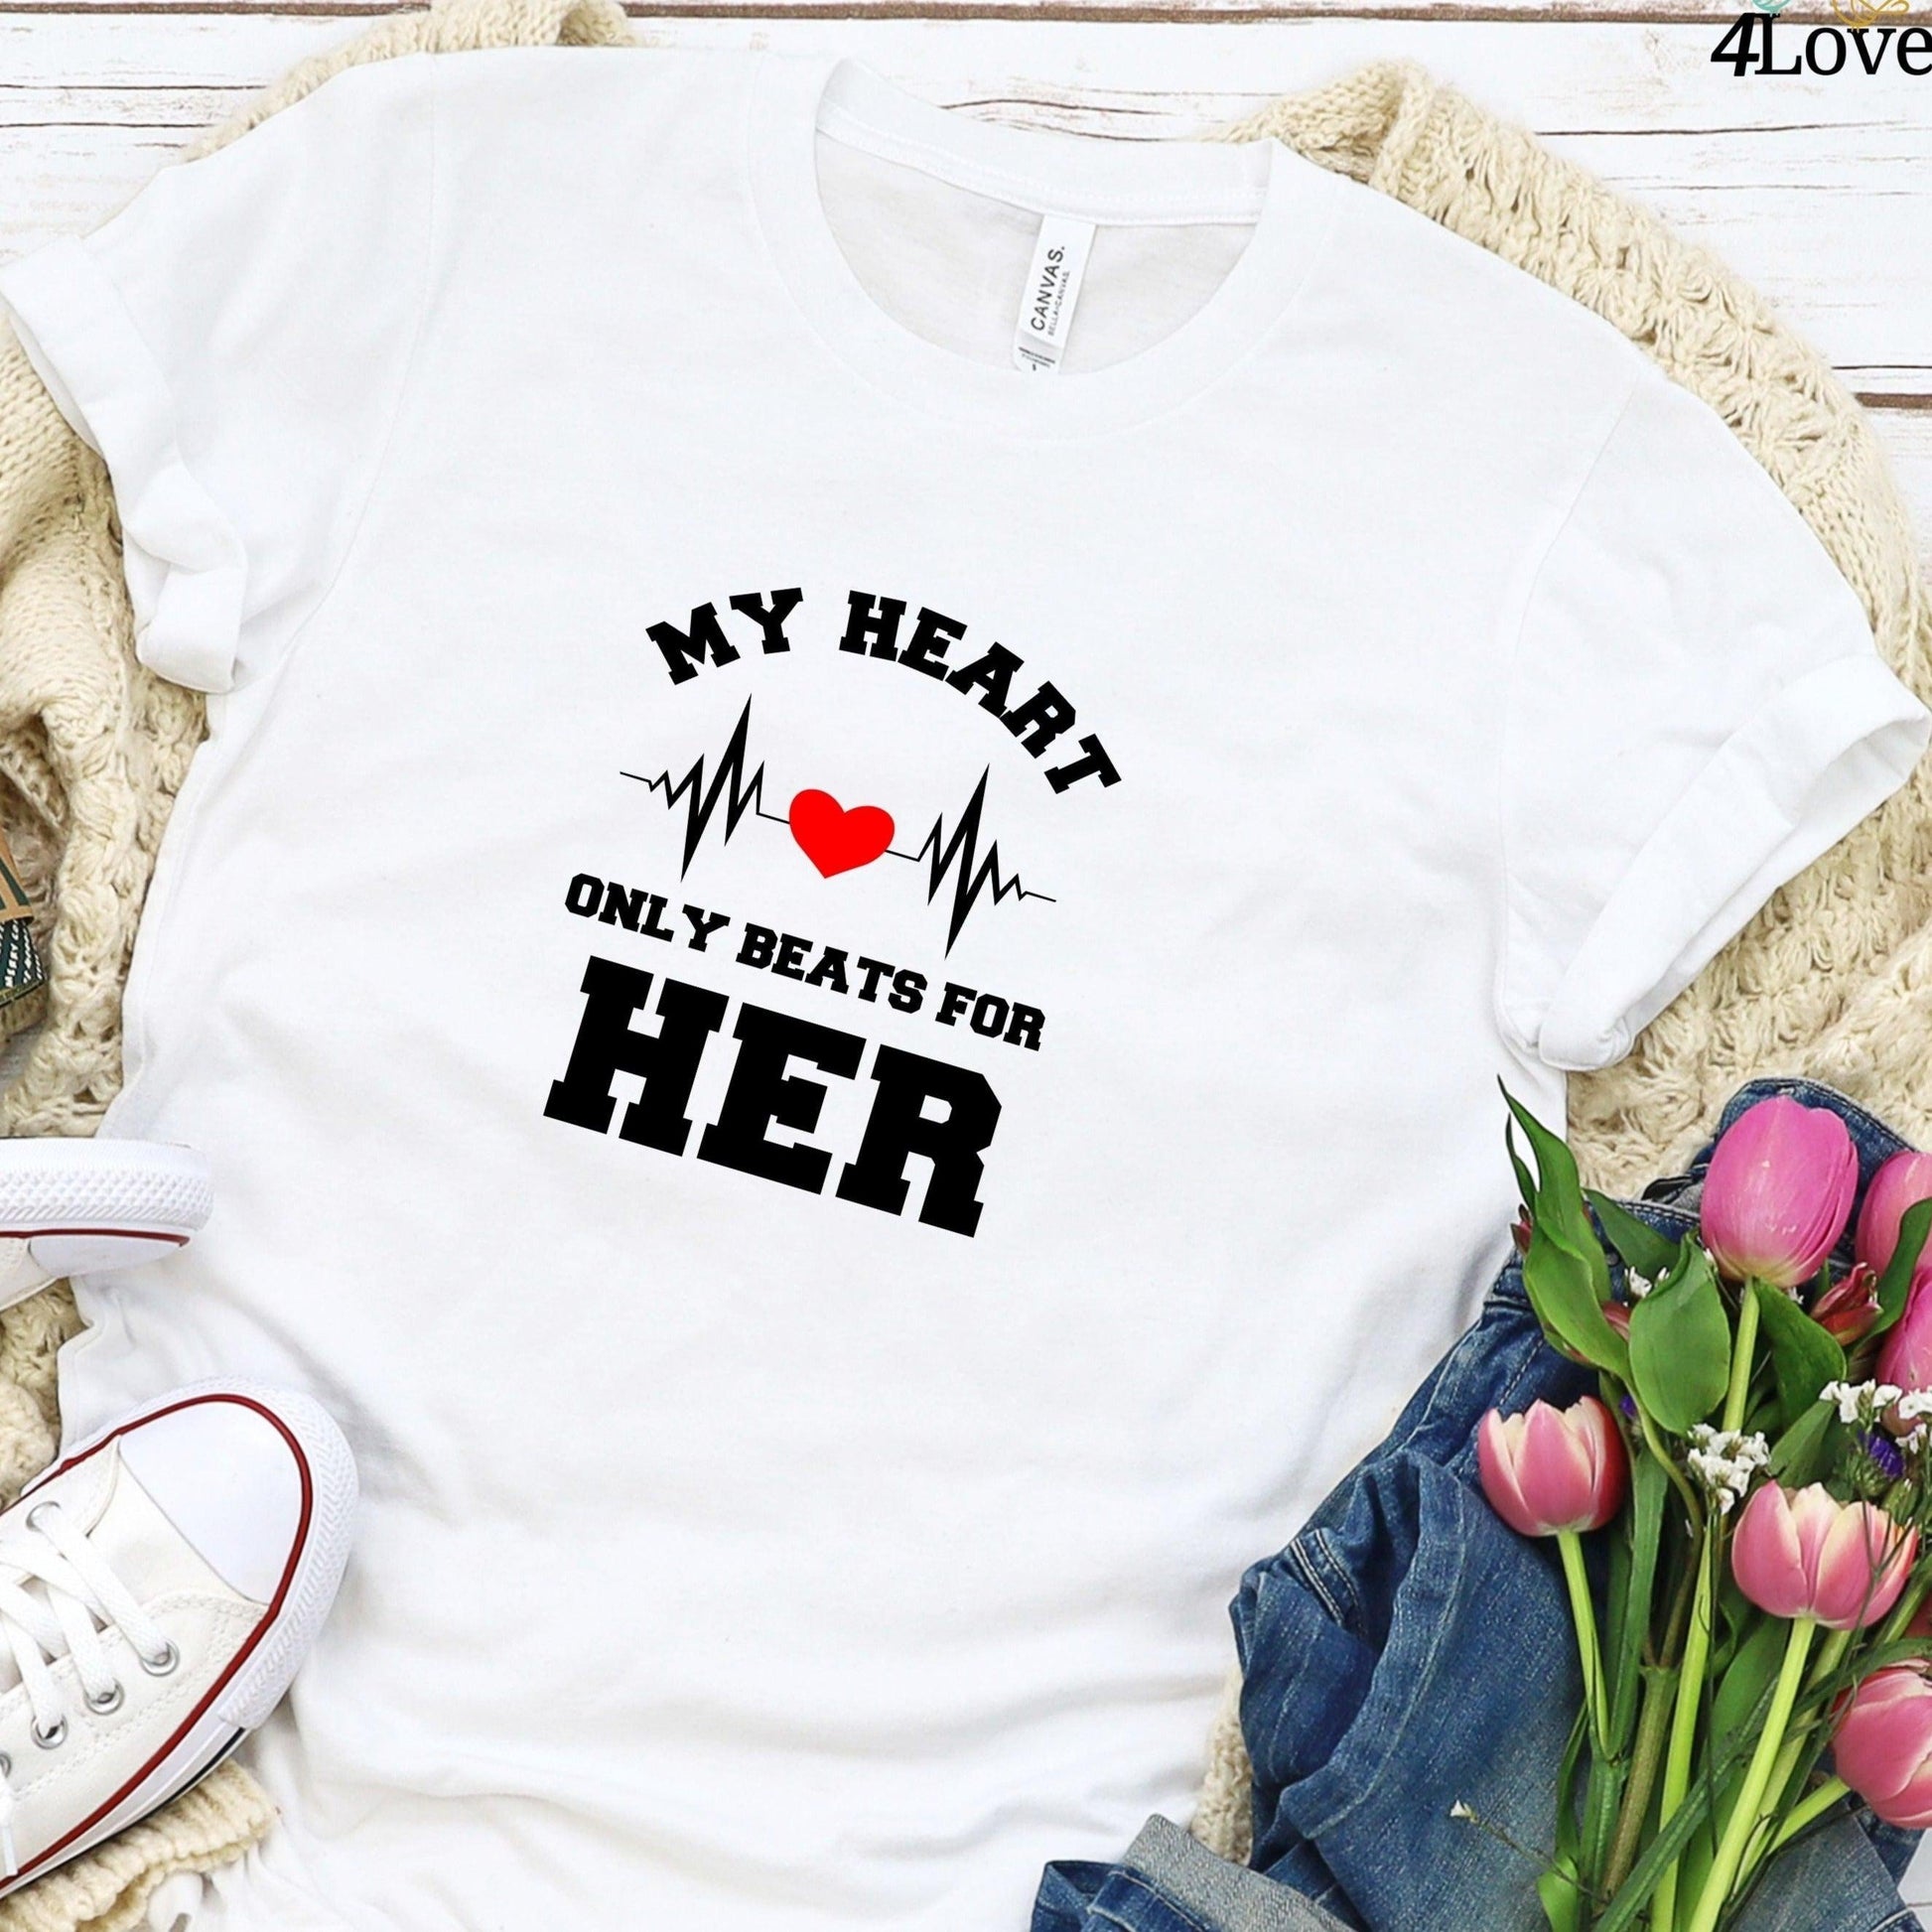 My Heart Only beats For Him/Her Outfits for Couples, Ideal Gift for Lover's Day - 4Lovebirds